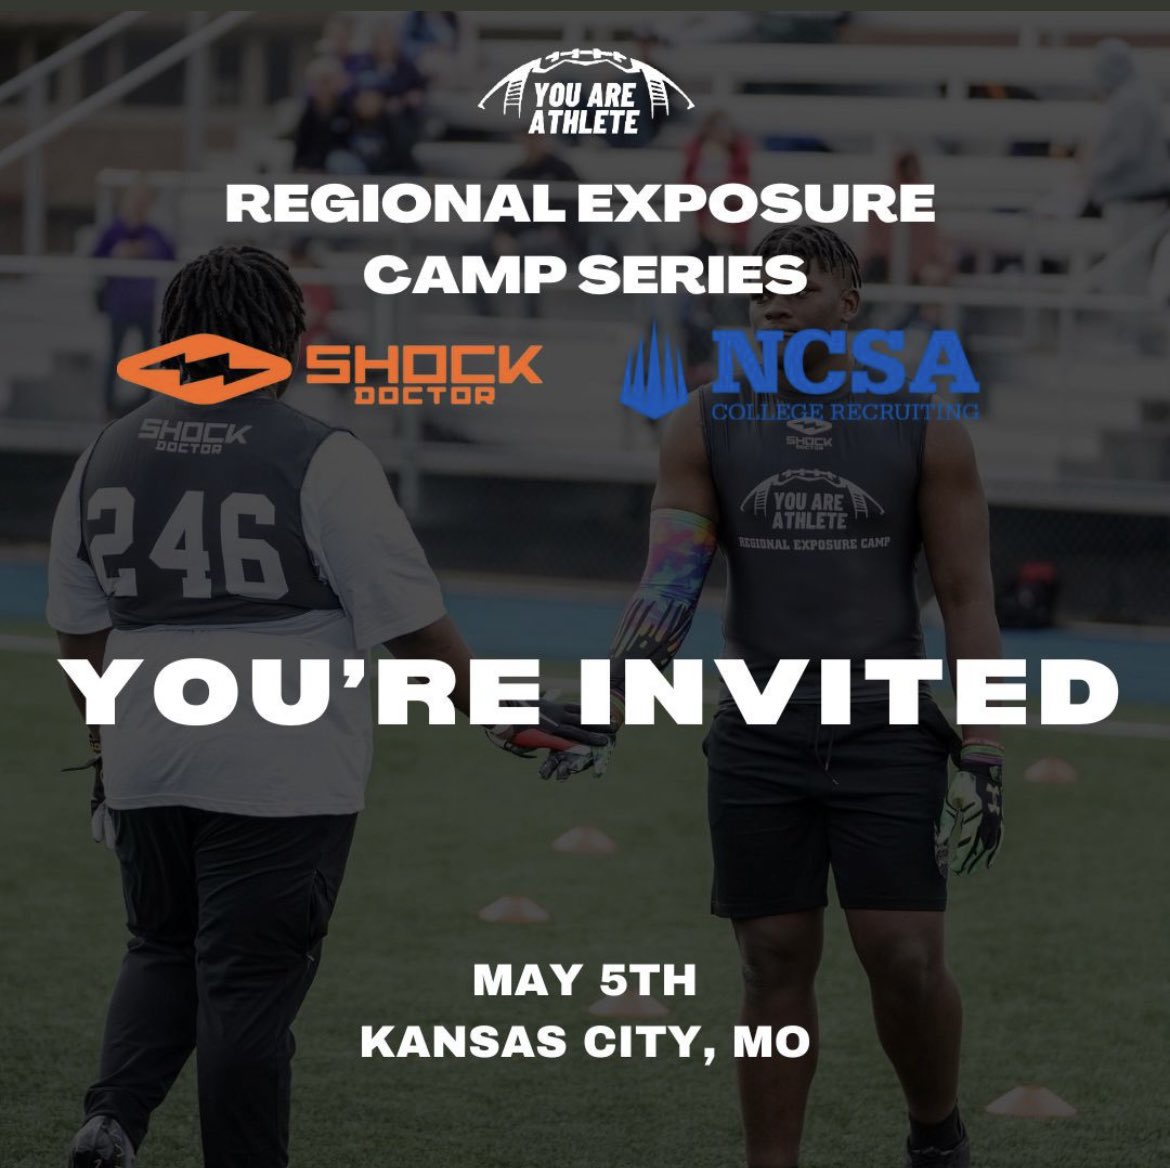 Thank you @youareathlete for the invite